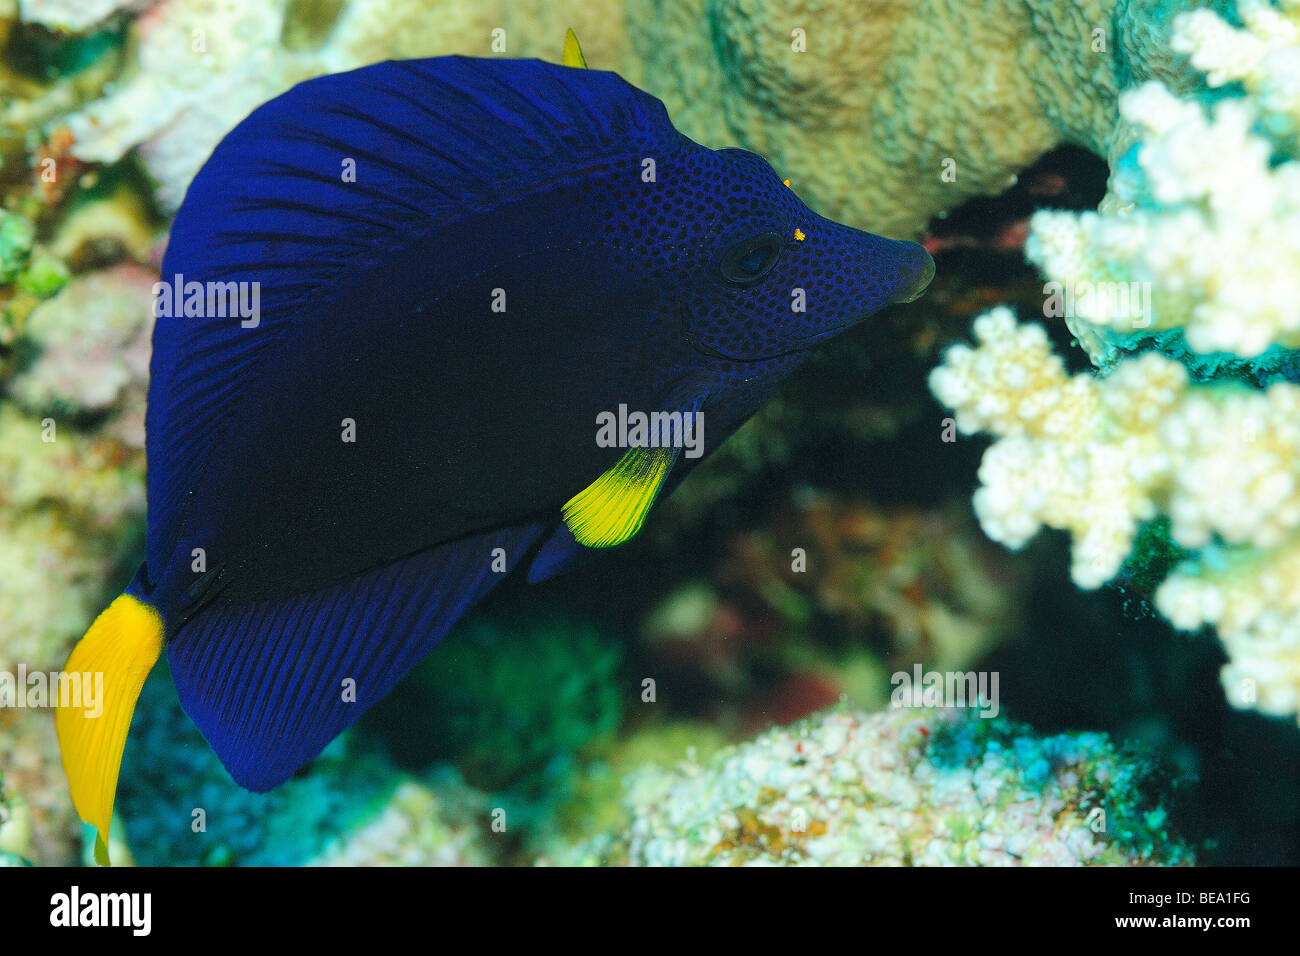 Yellowtail surgeonfish in the Red Sea, Egypt Stock Photo